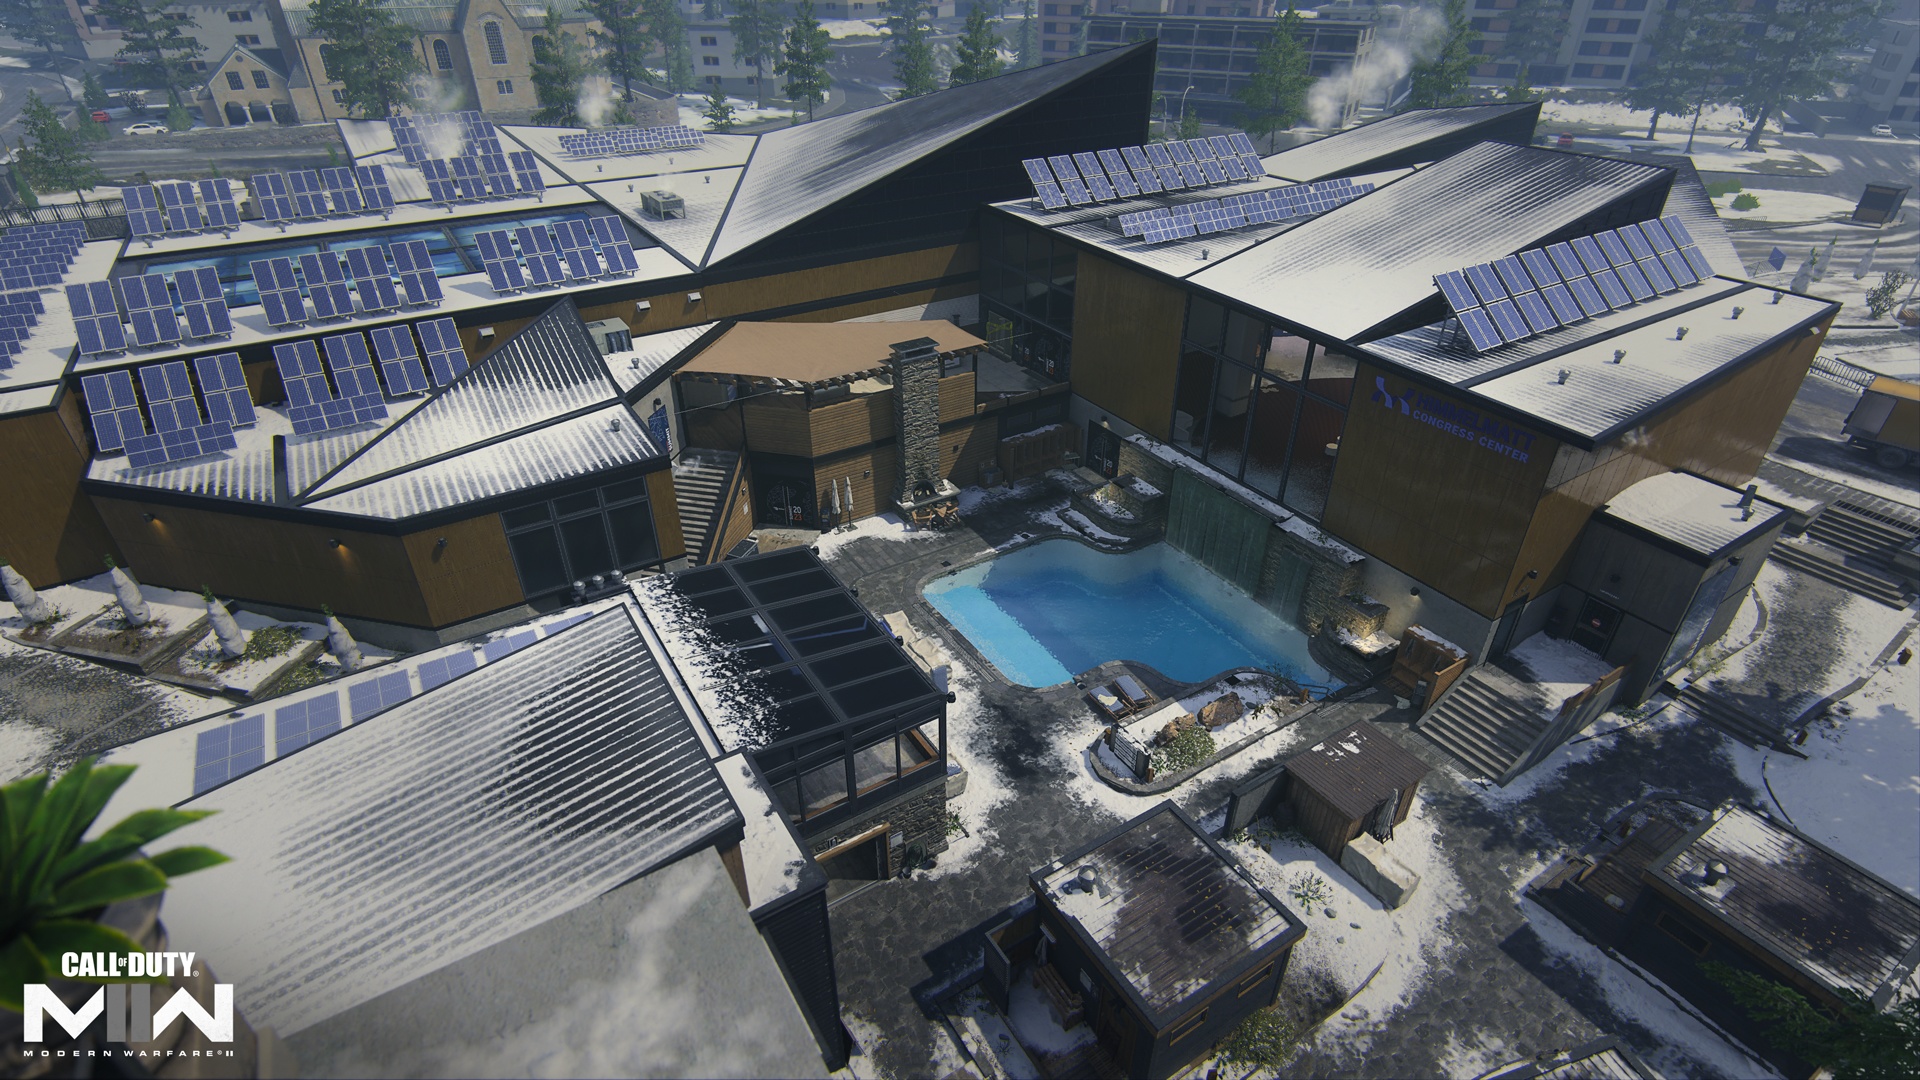 (The new map is very sustainable with all the solar panels on the roof!)